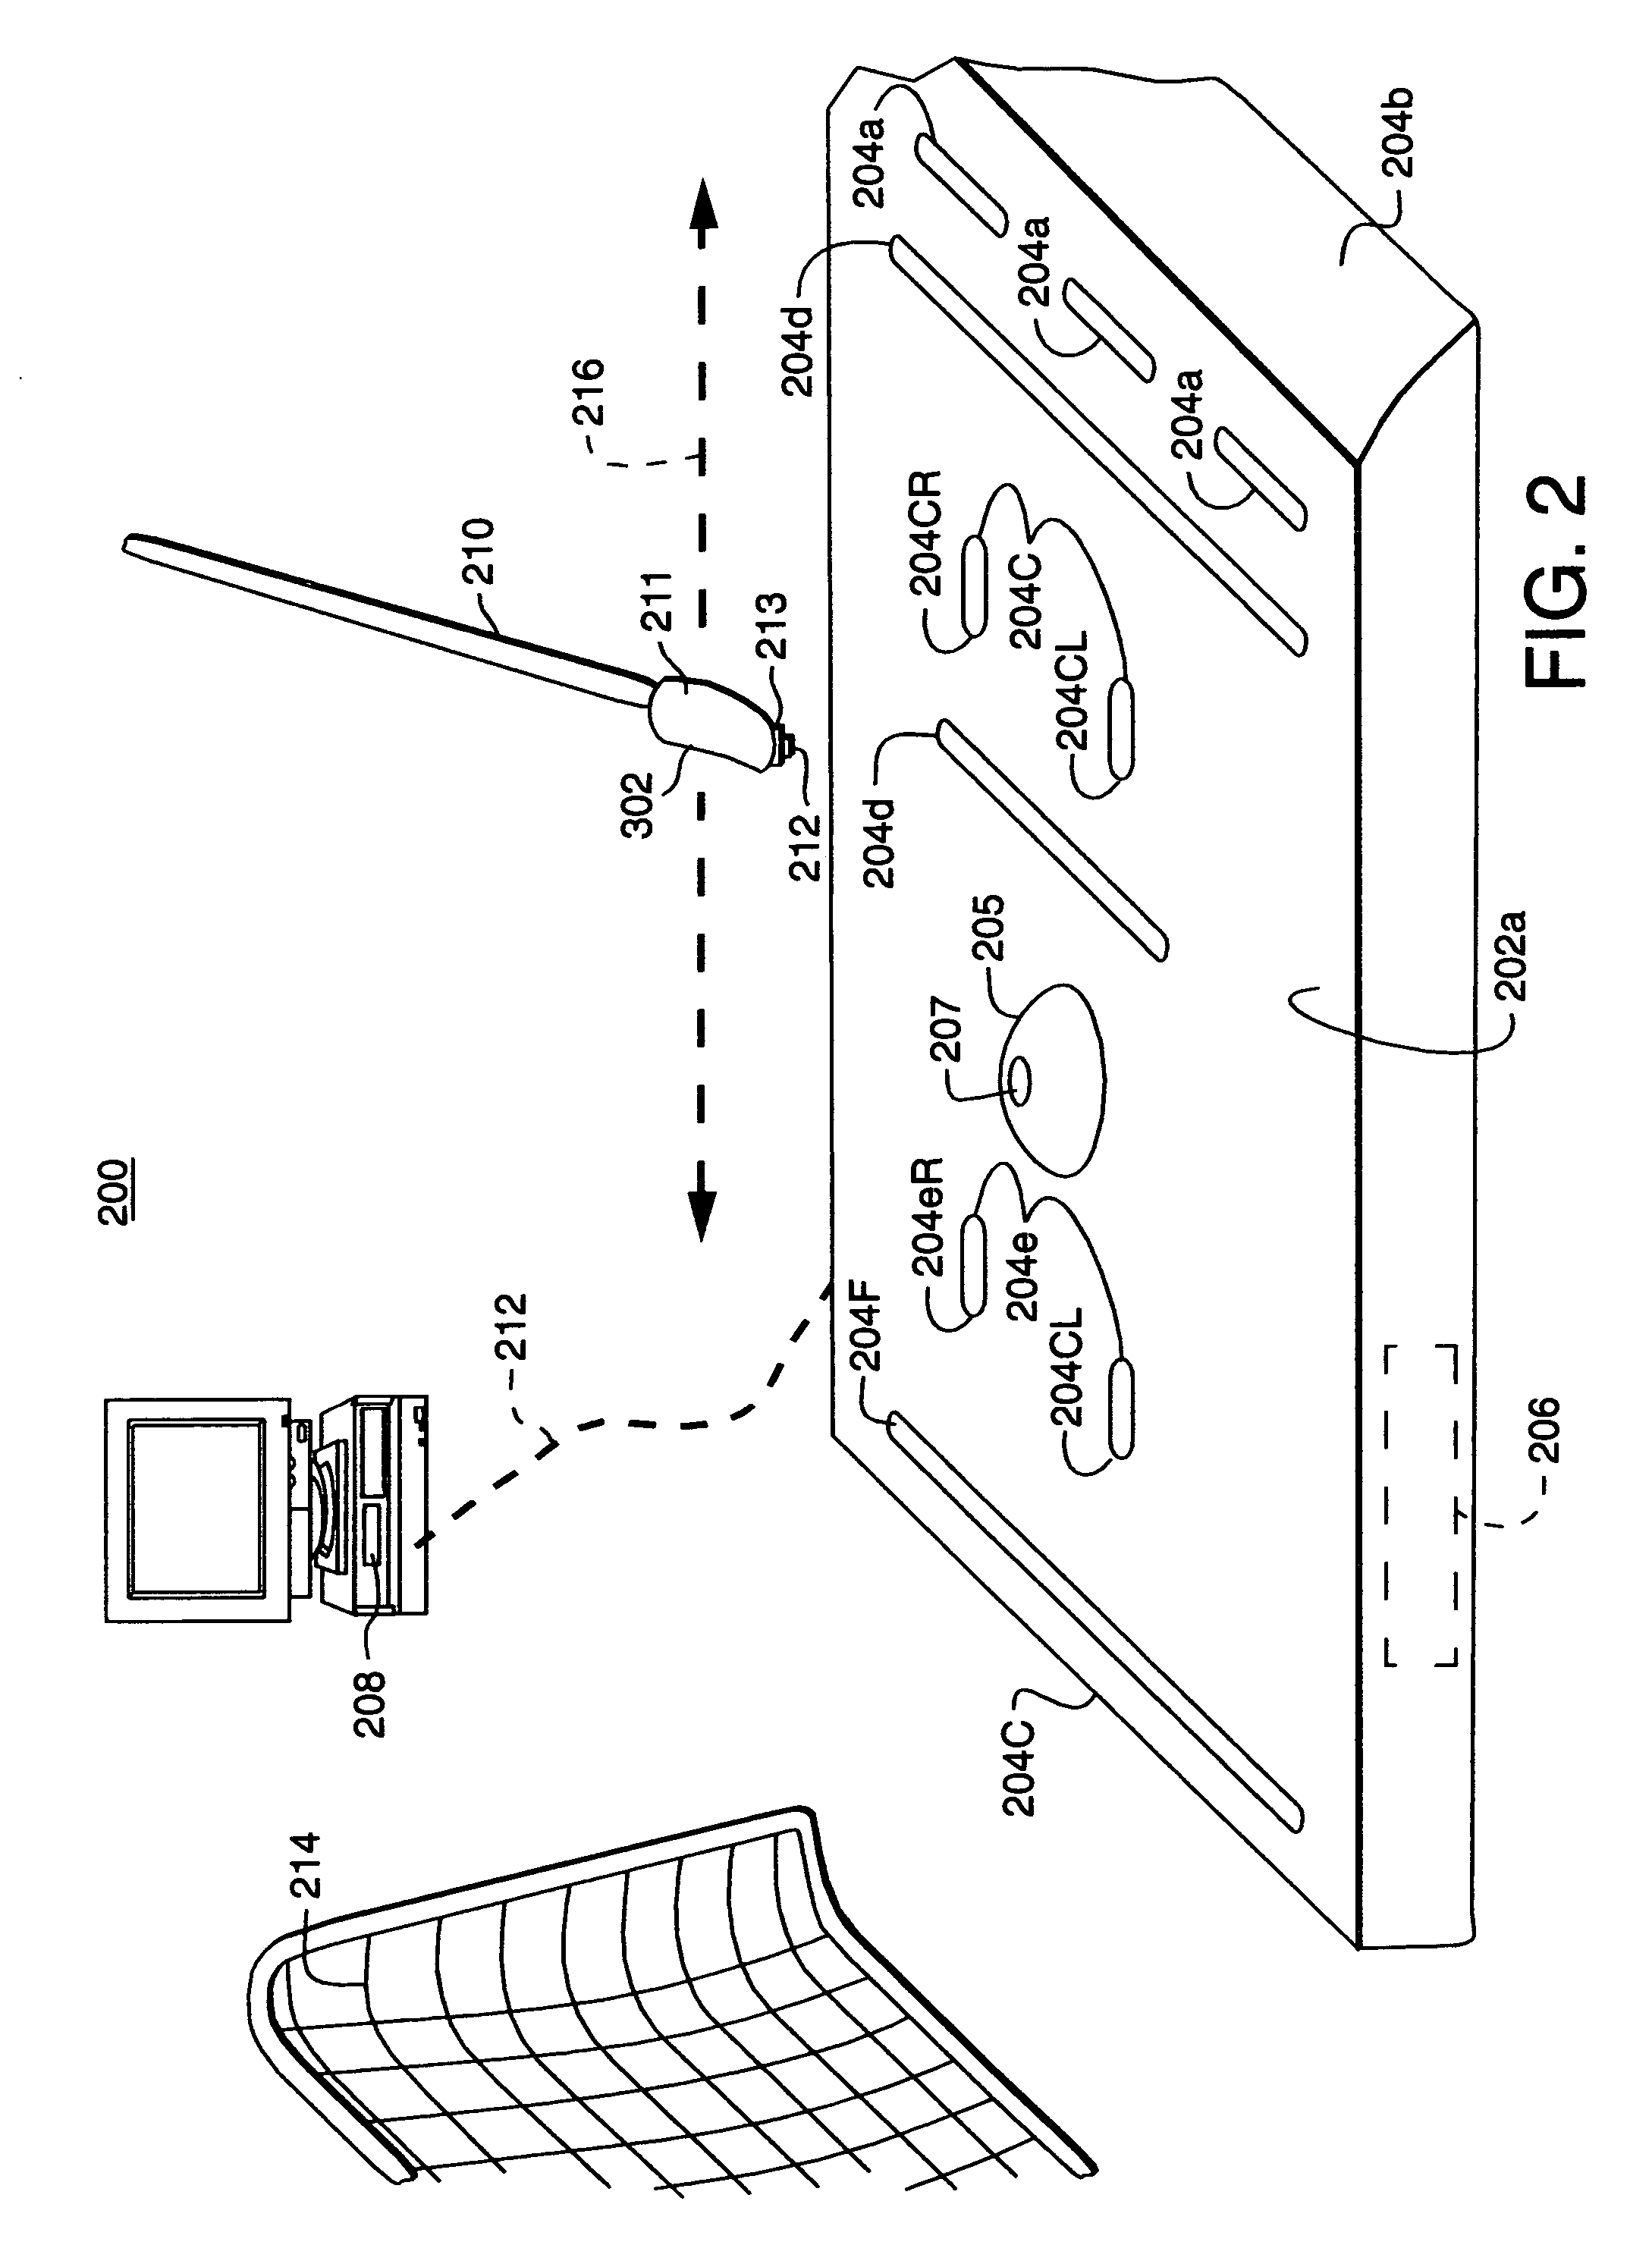 Method and apparatus for sport swing analysis system